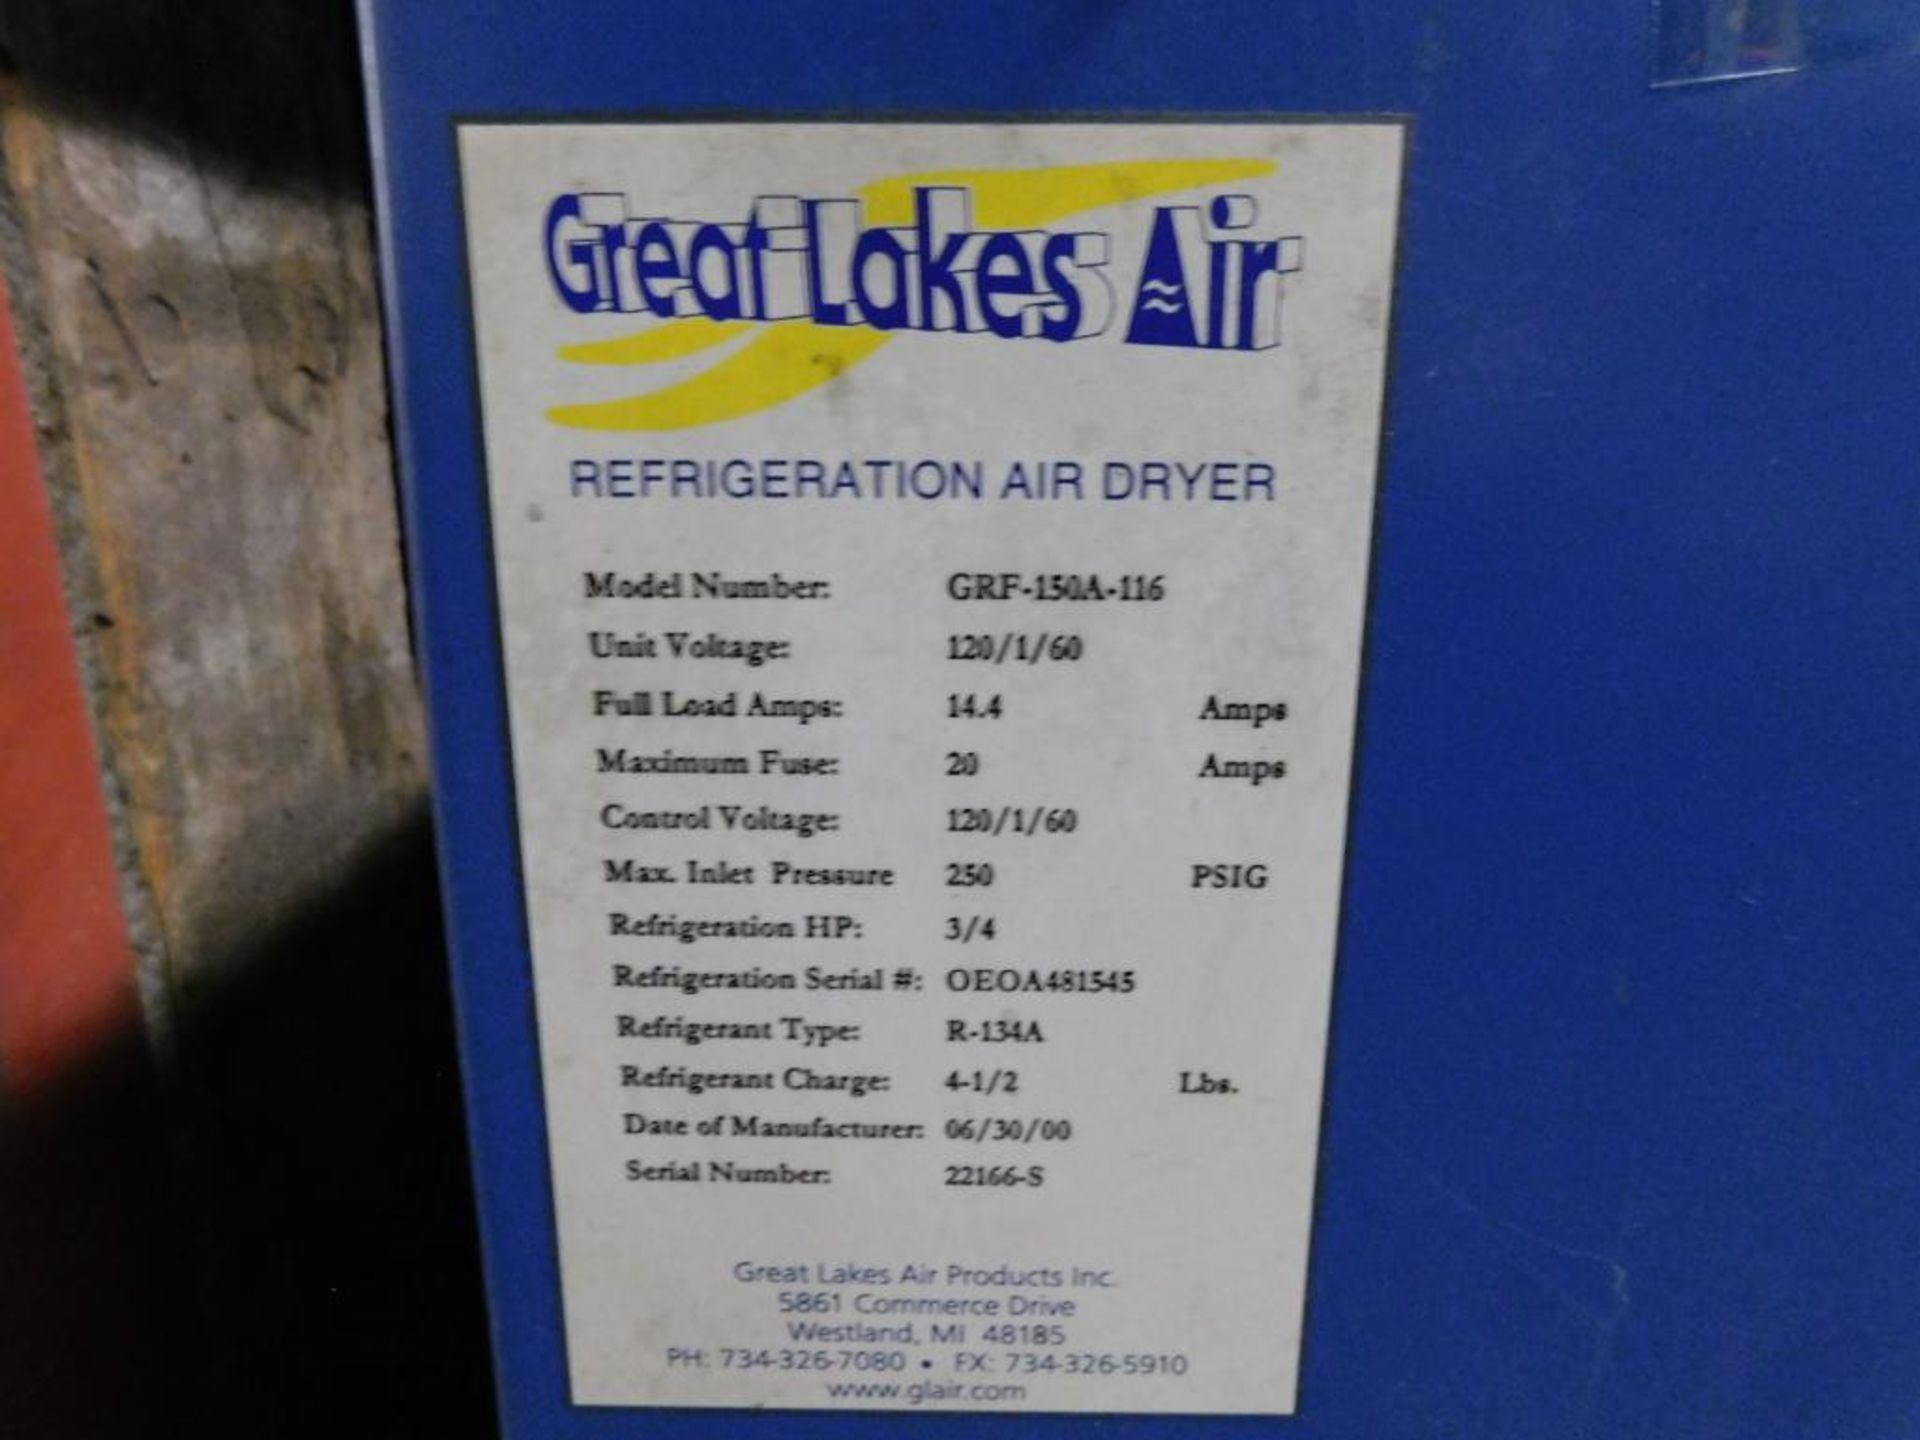 Great Lakes Air Refrigeration Air Dryer, Model GRF-150A-116, S/N 22166-S - Image 2 of 2